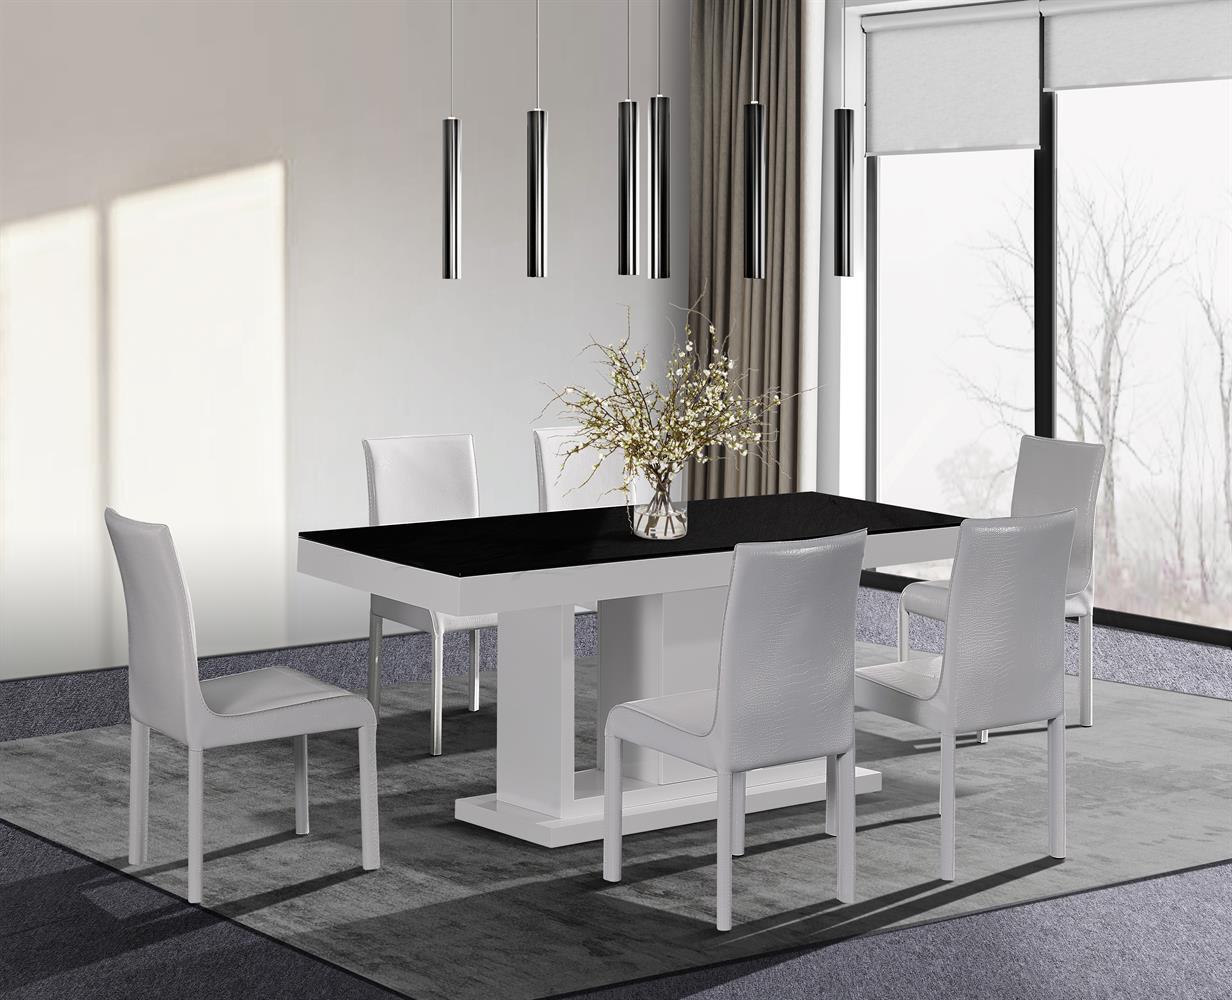 7 Pieces Dining Suite Dining Table & 6X white Chairs in Rectangular Shape High Glossy MDF Wooden Base Combination of Black & White Colour